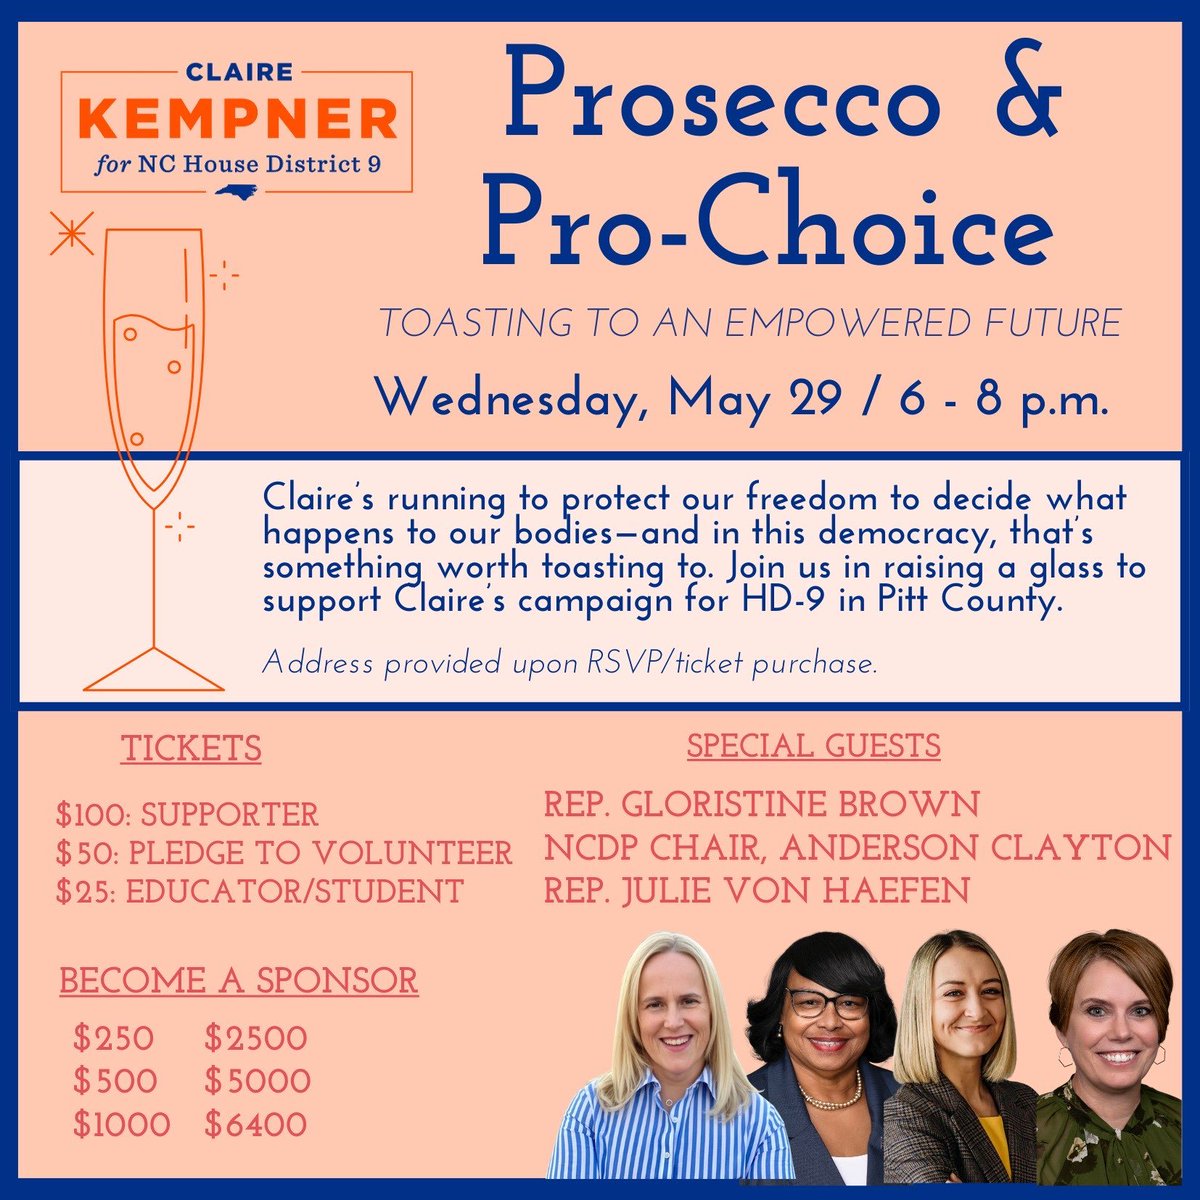 Looking for a fun way to get involved in politics and meet amazing women? Join me, Representative @GloristineBrown, NCDP Chair @abreezeclayton, and Representative @juliefornc for Prosecco and Pro-Choice: Toasting to an Empowered Future! Get tickets here: secure.actblue.com/donate/clairef…